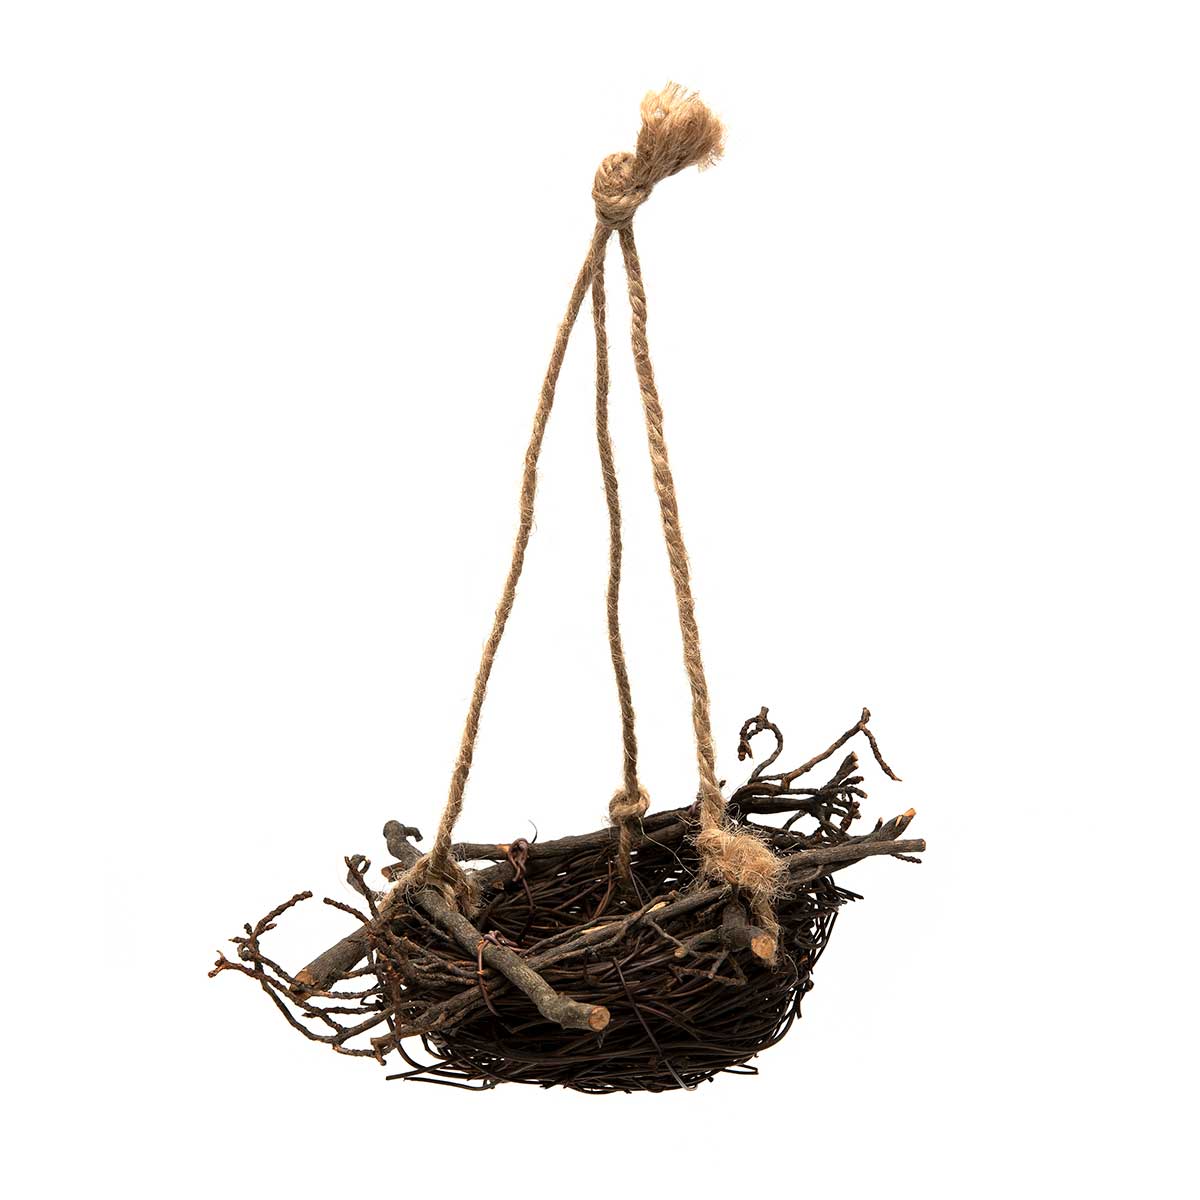 TWIG NEST HANGING LARGE 7.5IN X 2.5IN TWIG/WOOD